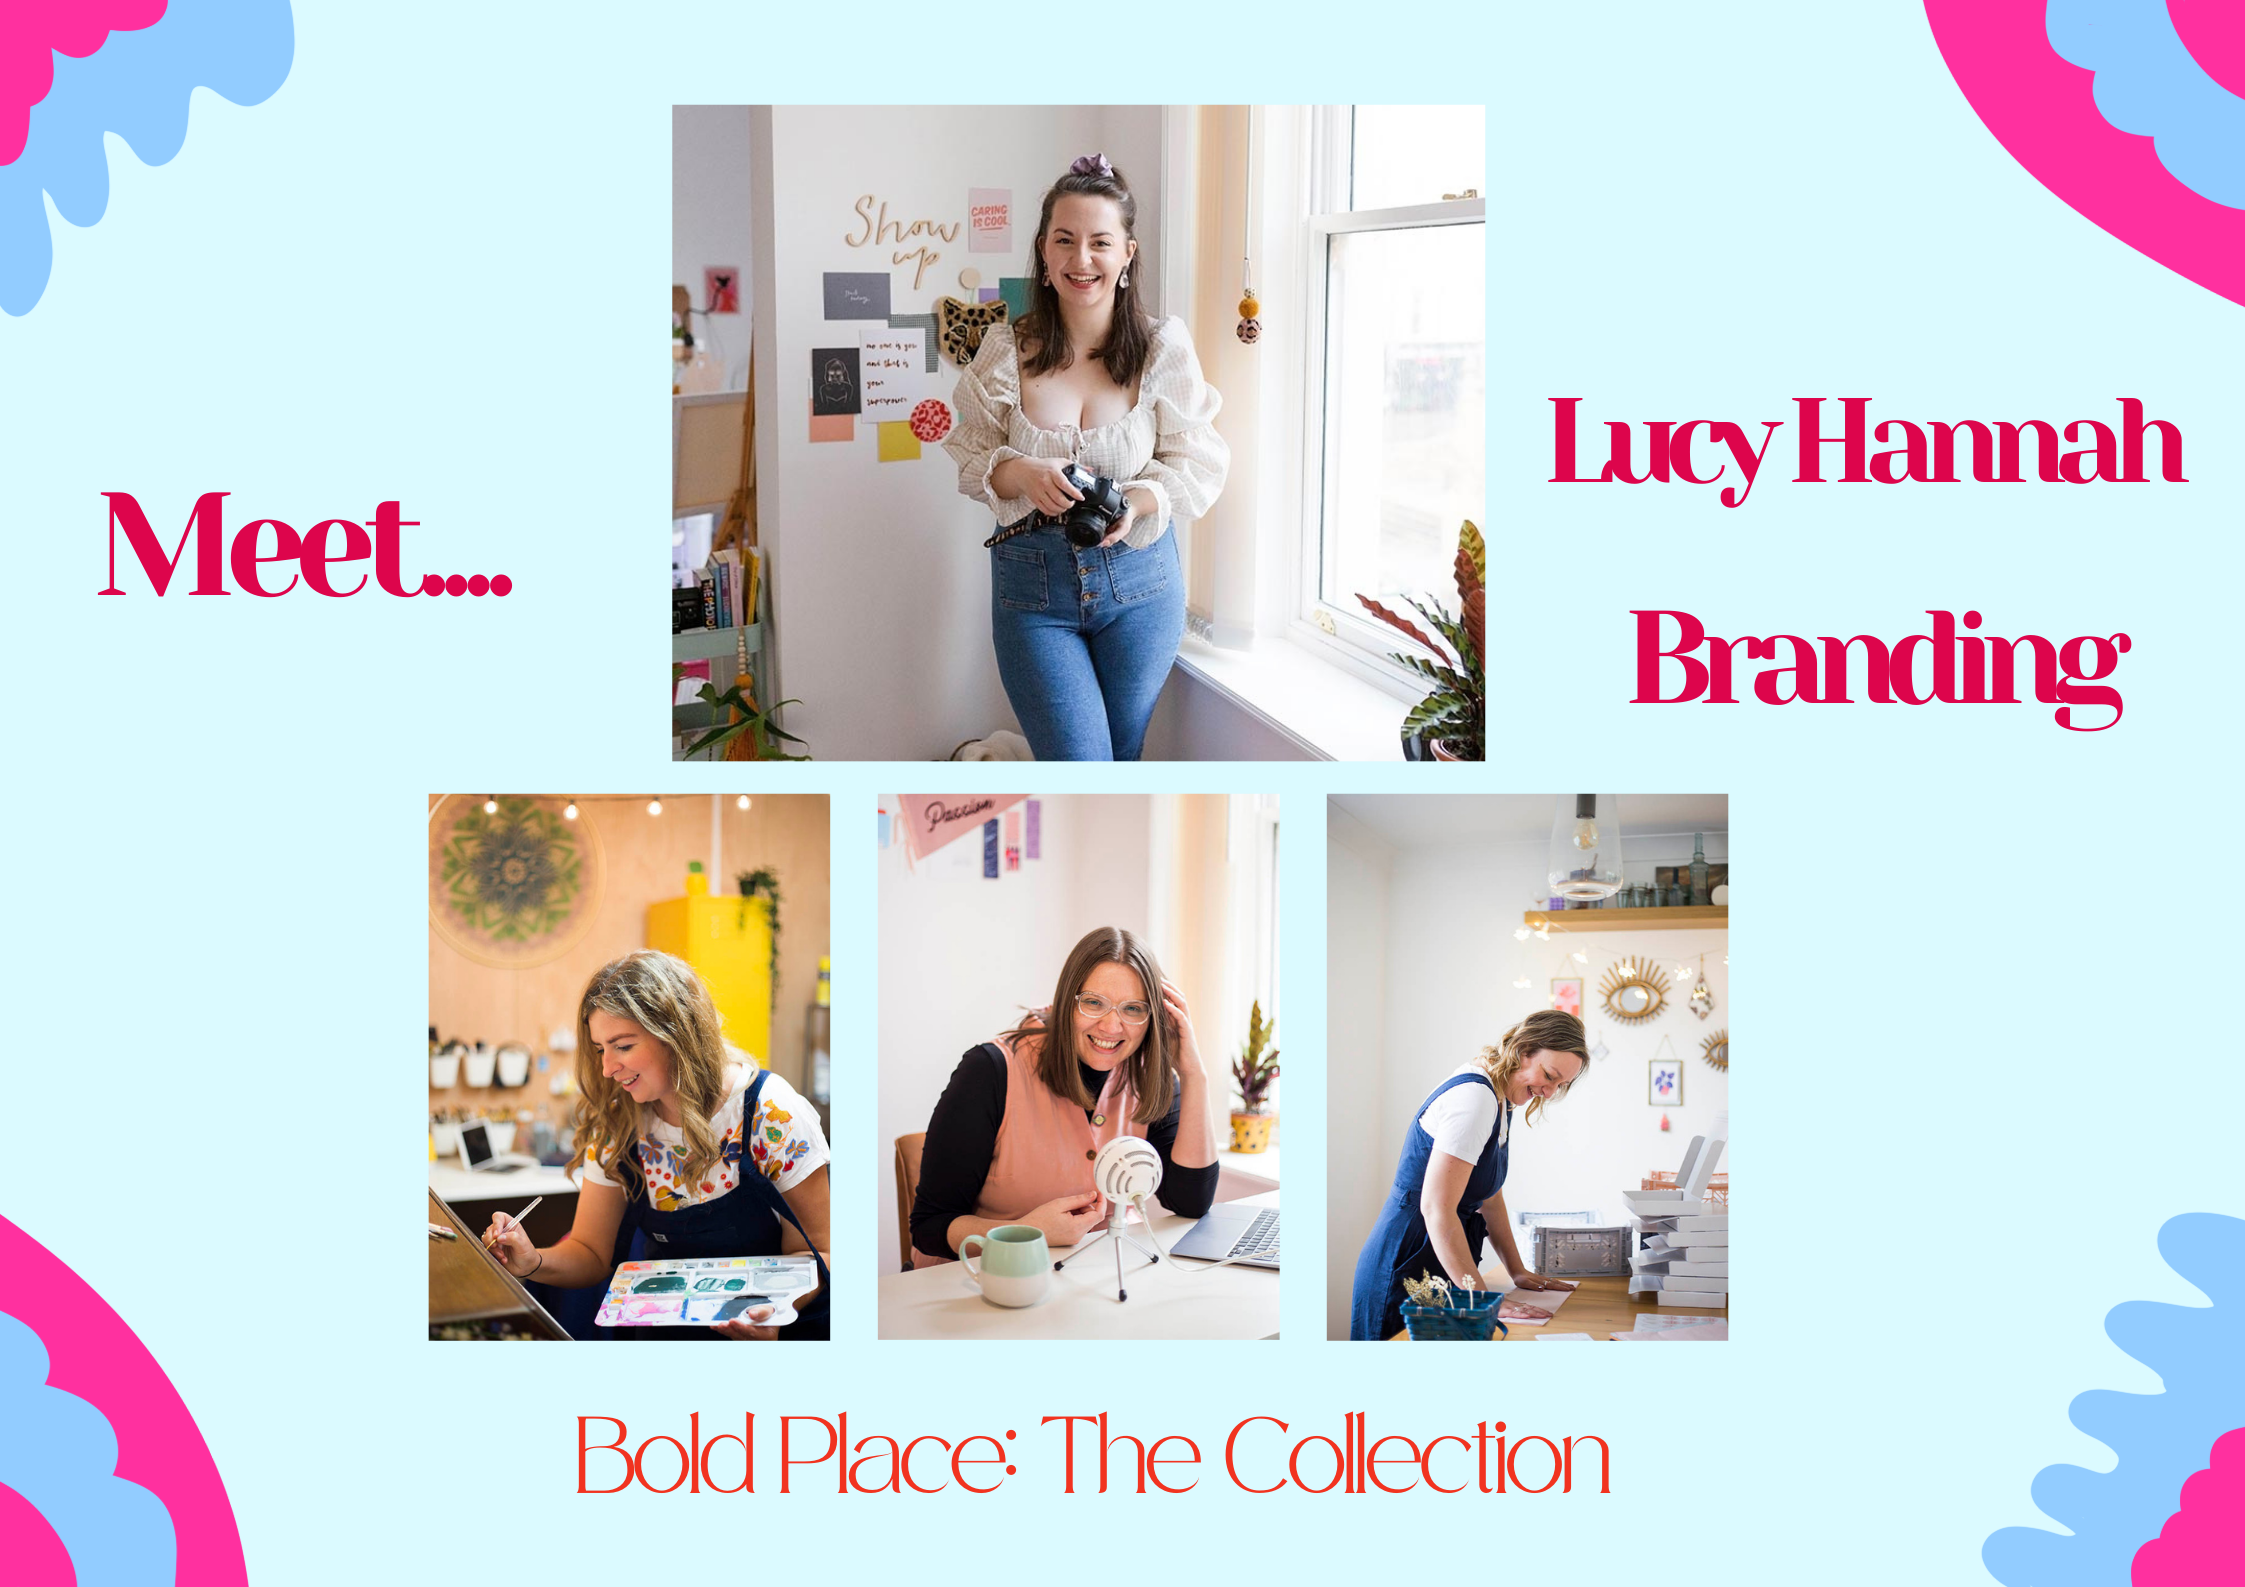 Bold Place: Lucy Hannah Branding